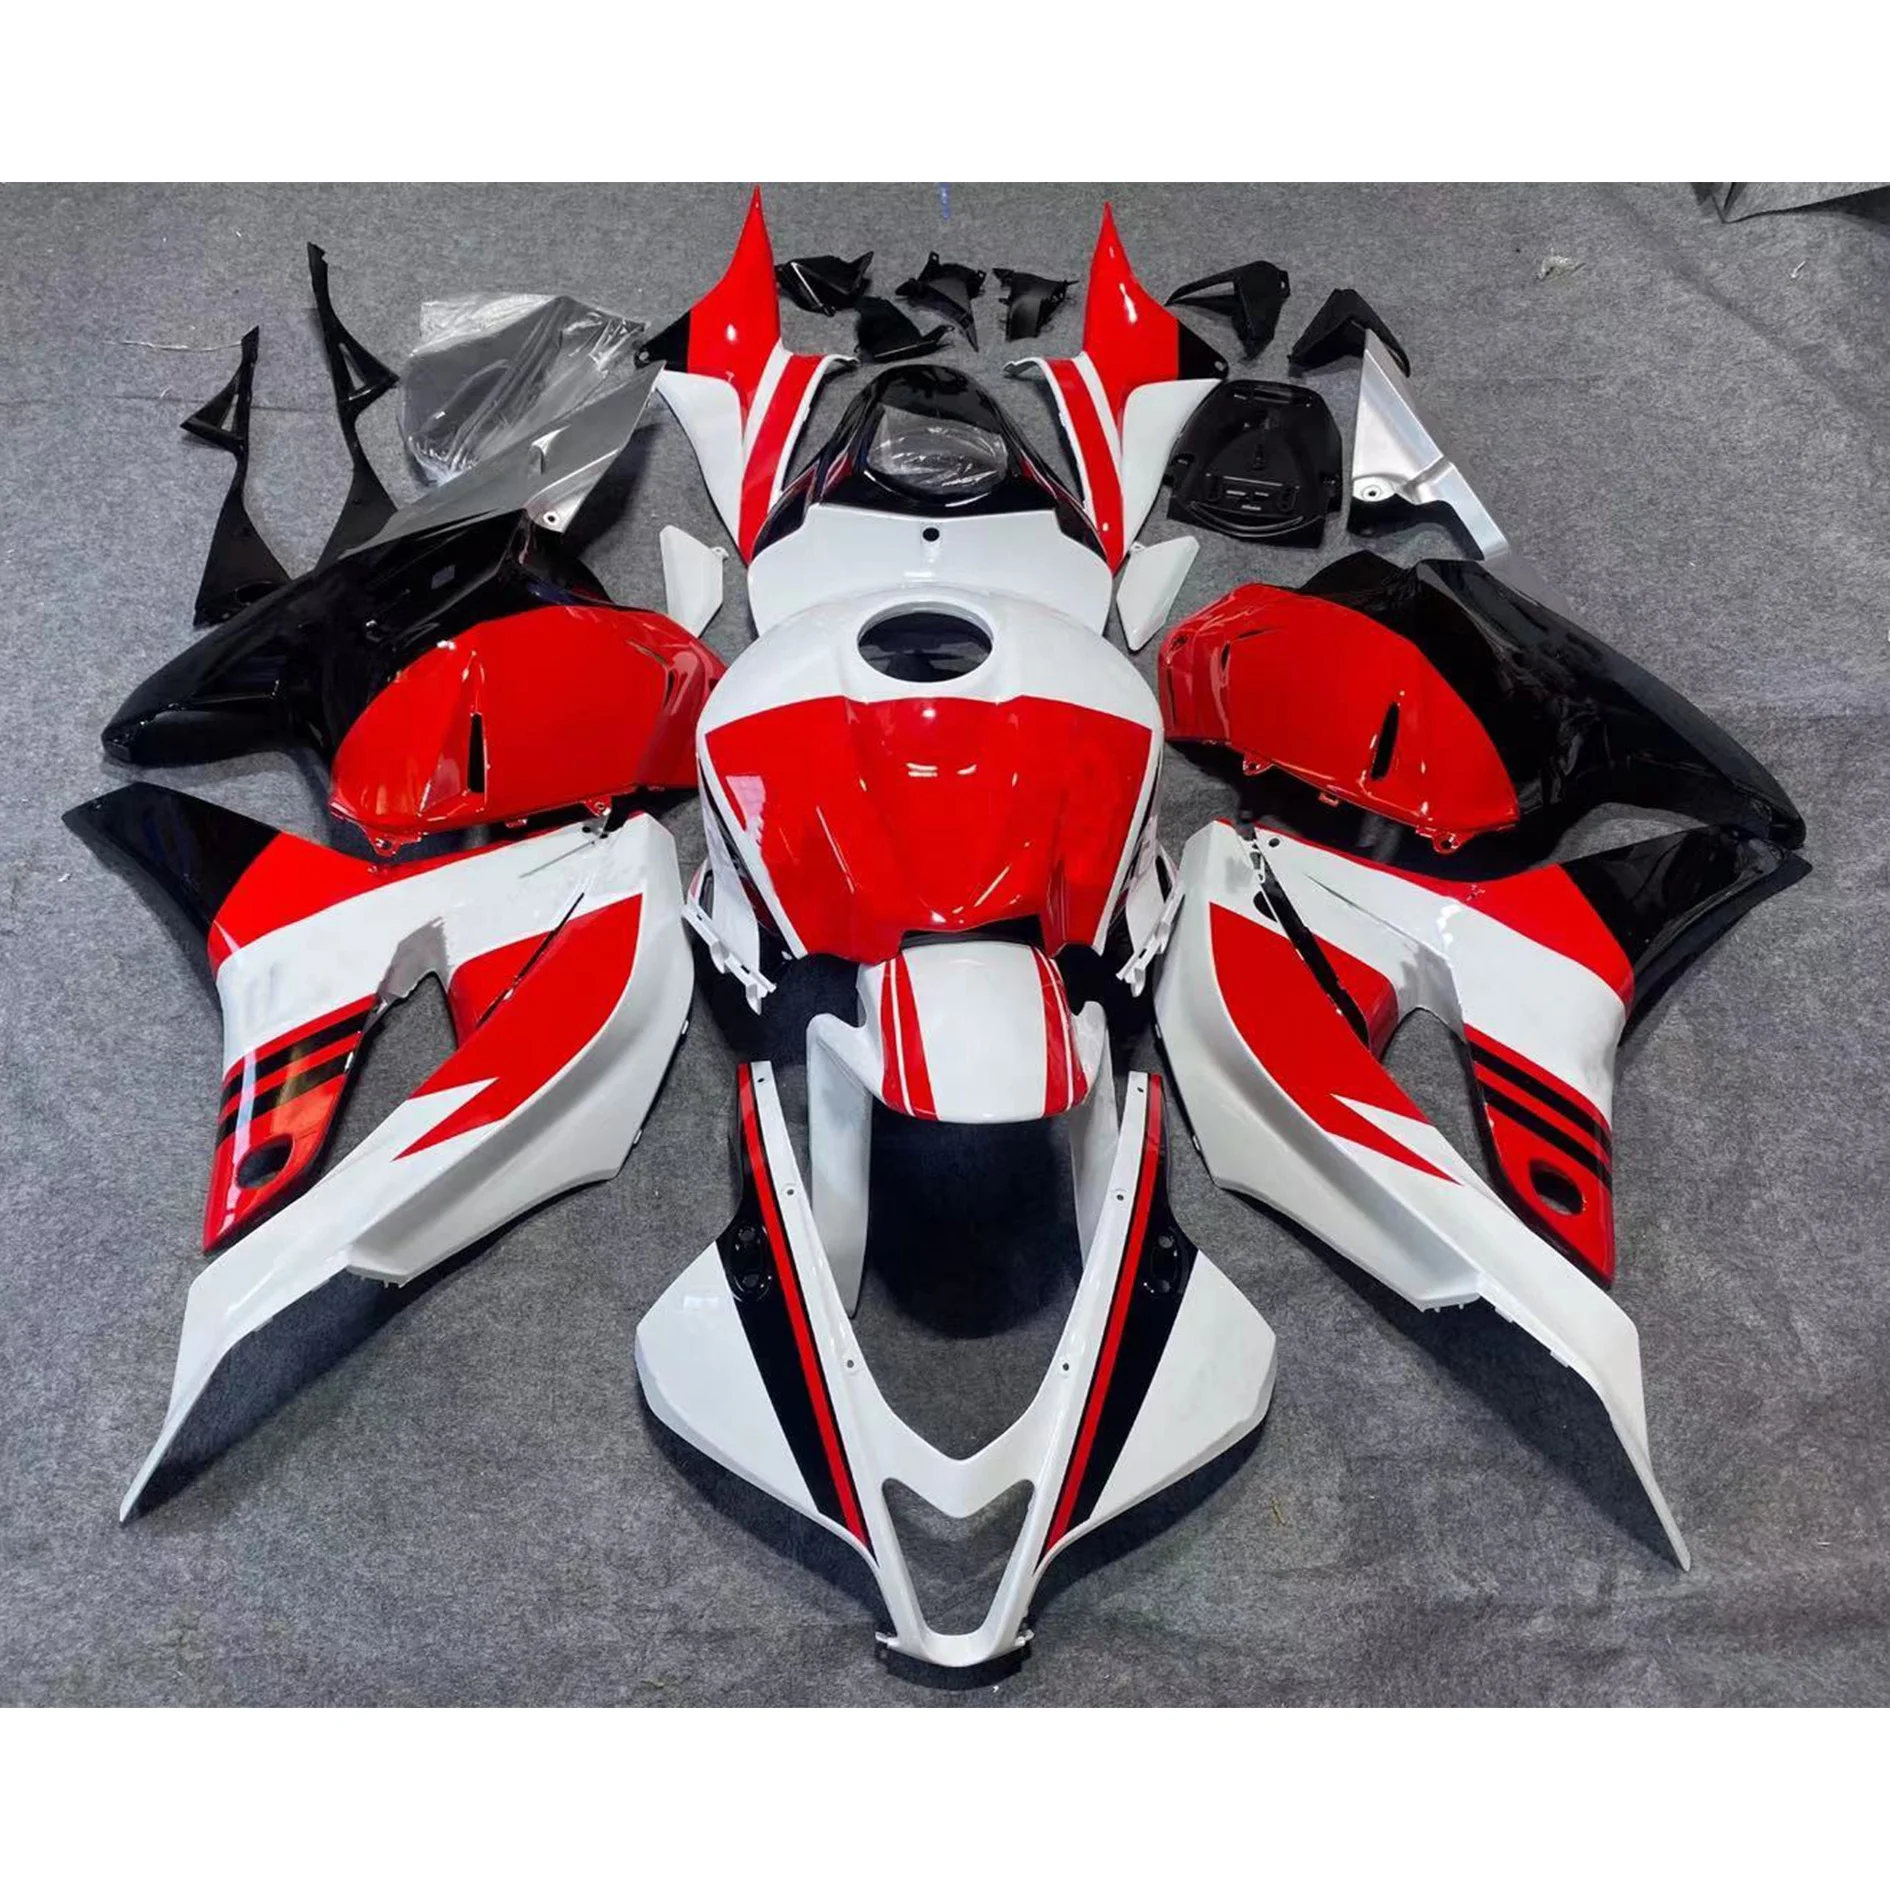 

2022 WHSC Red Black White Motorcycle Accessories For HONDA CBR600 RR 2009-2012 09 10 11 12 Motorcycle Body Systems Fairing Kits, Pictures shown